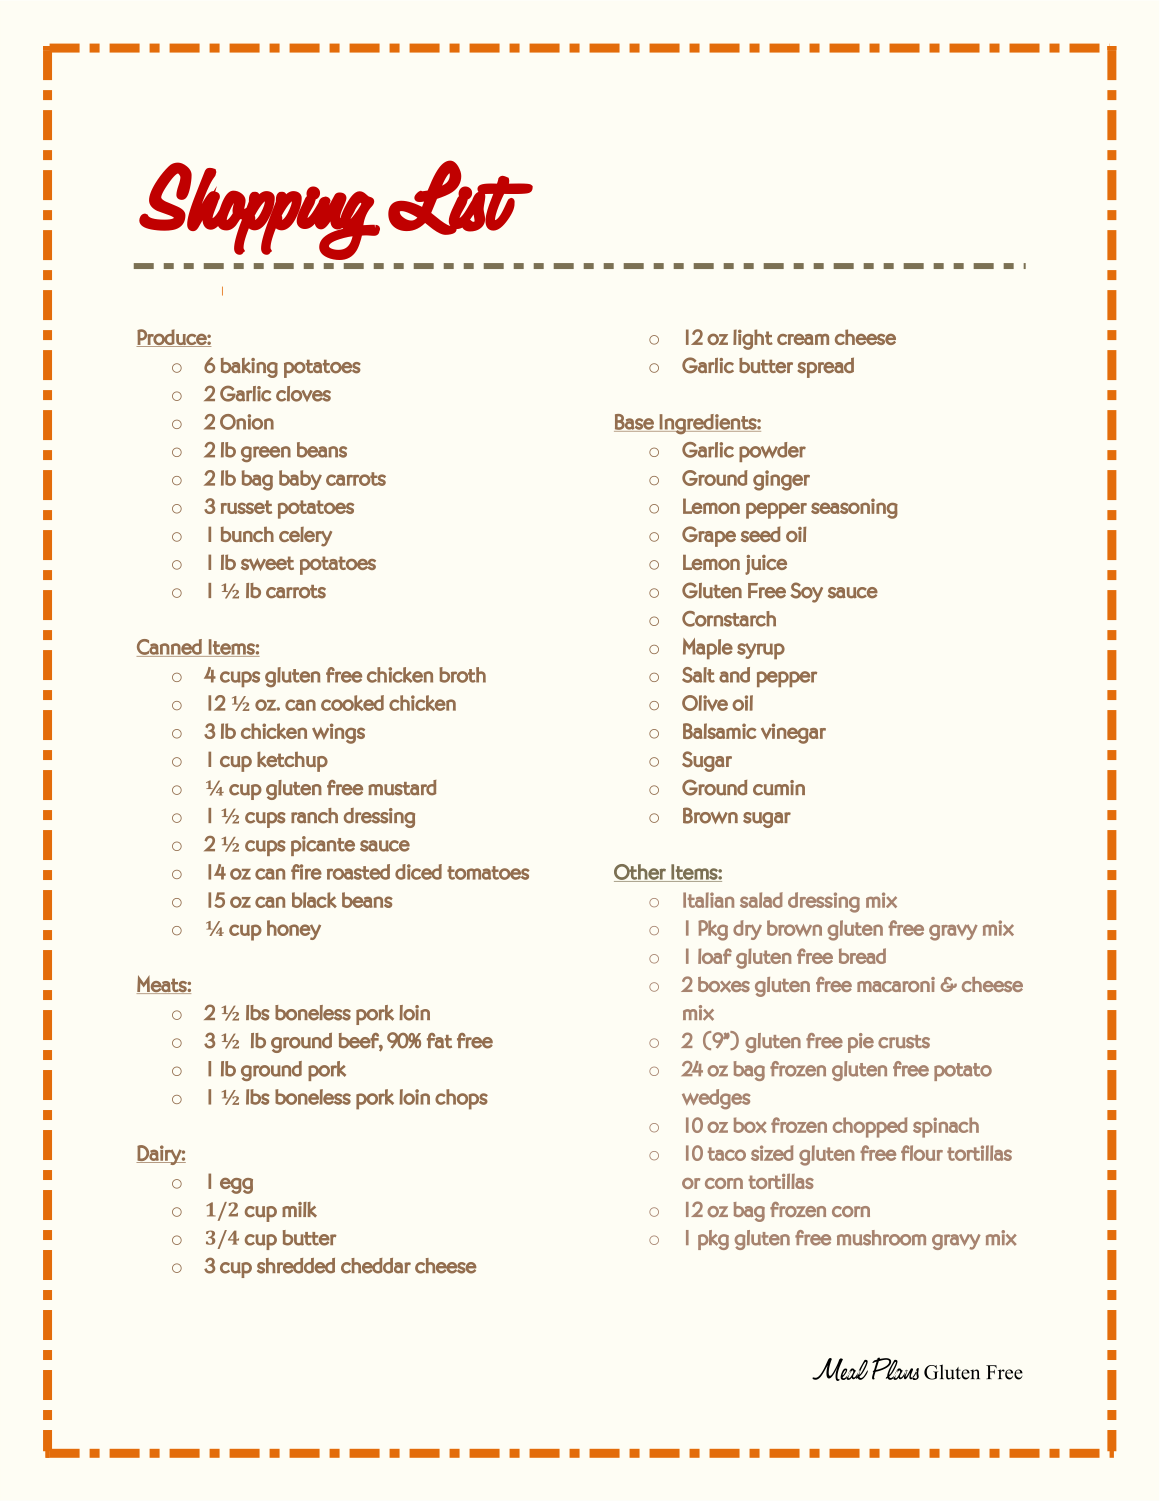 Meal Plans – PG6